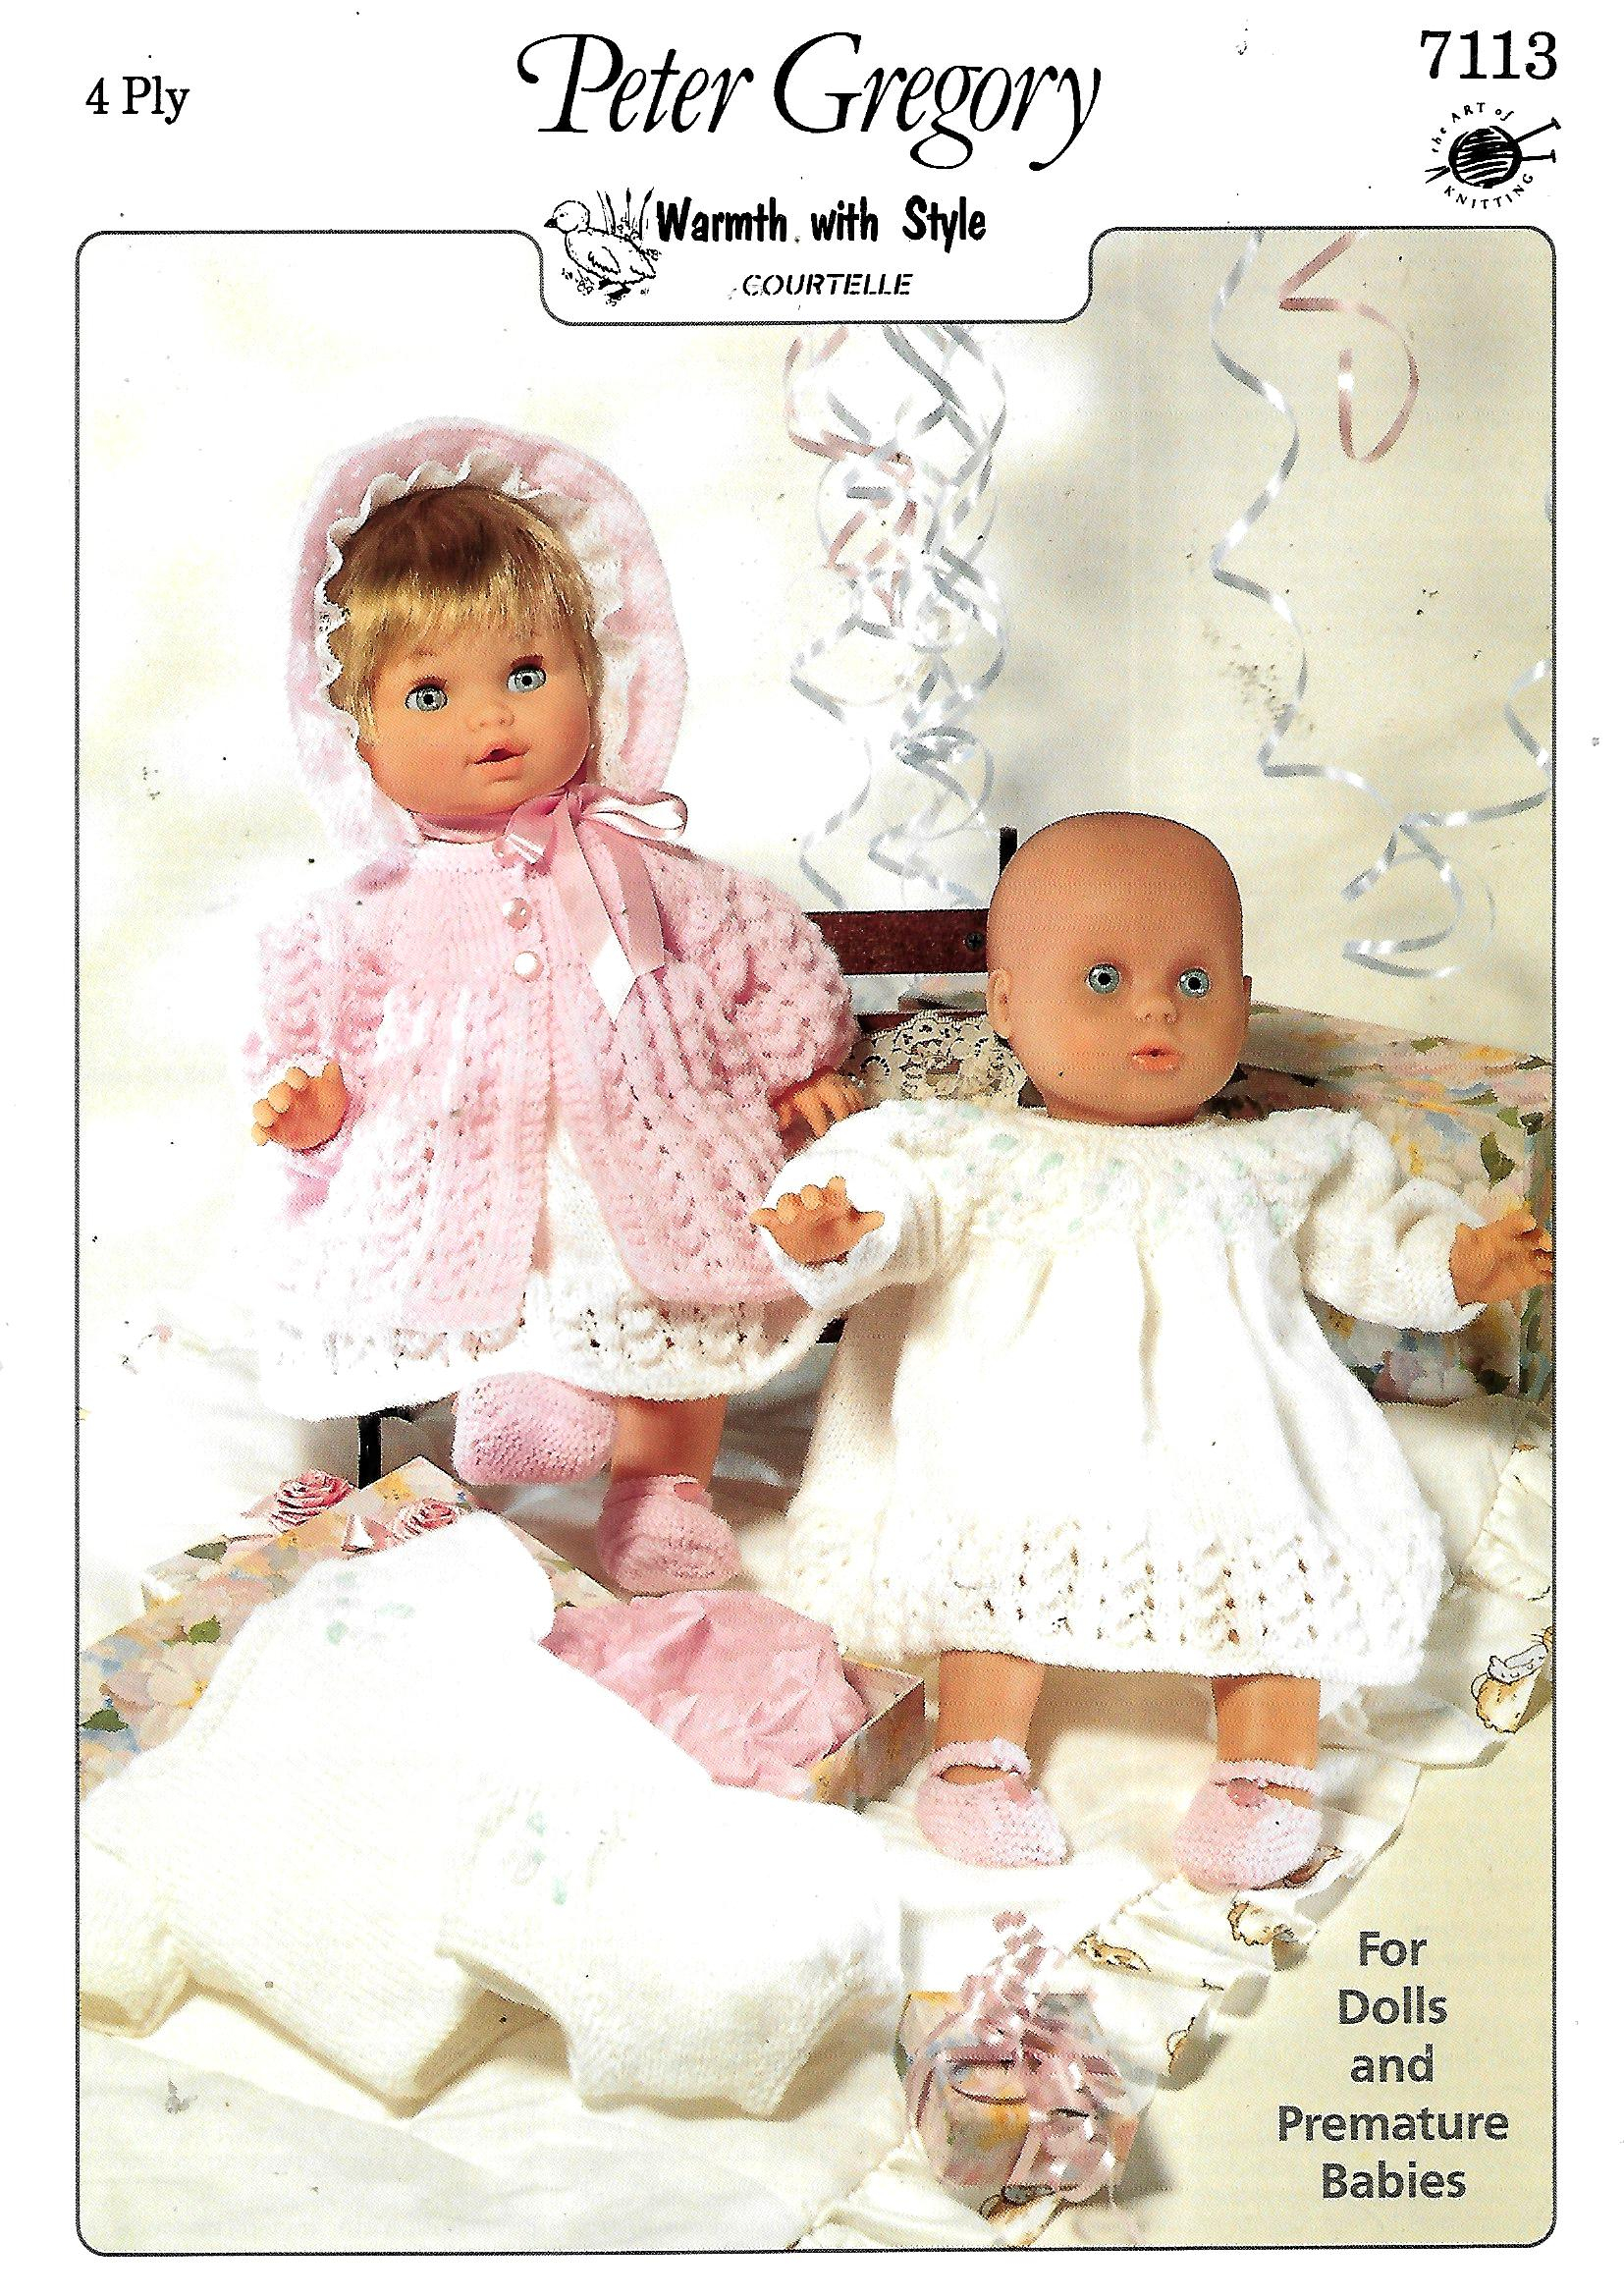 Premature Baby Knitting Patterns Peter Gregory 7113 Dollpremature Ba Knitting Pattern